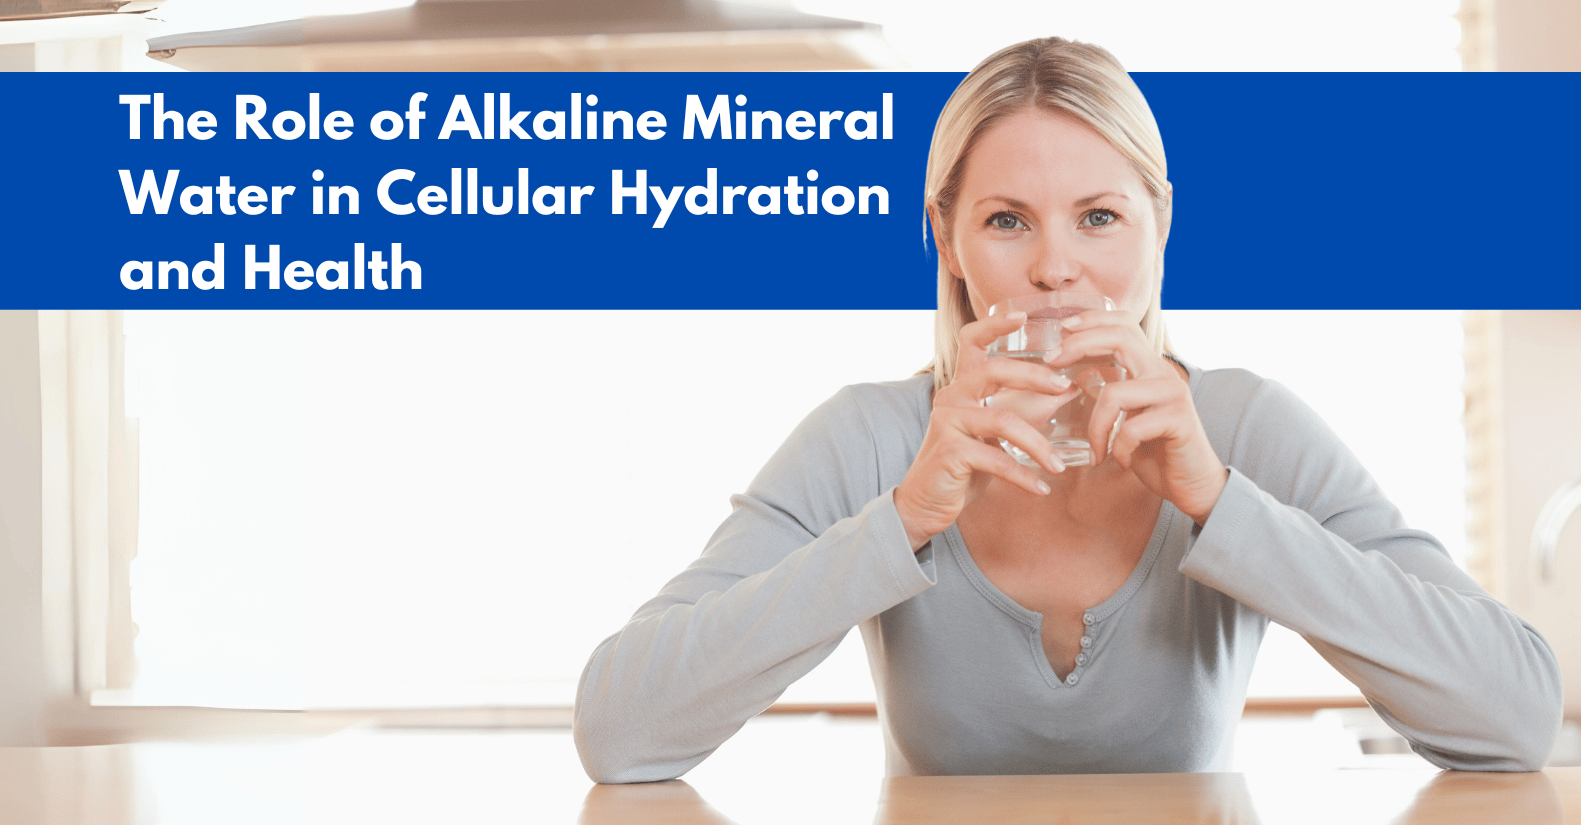 The Role of Alkaline Mineral Water in Cellular Hydration and Health